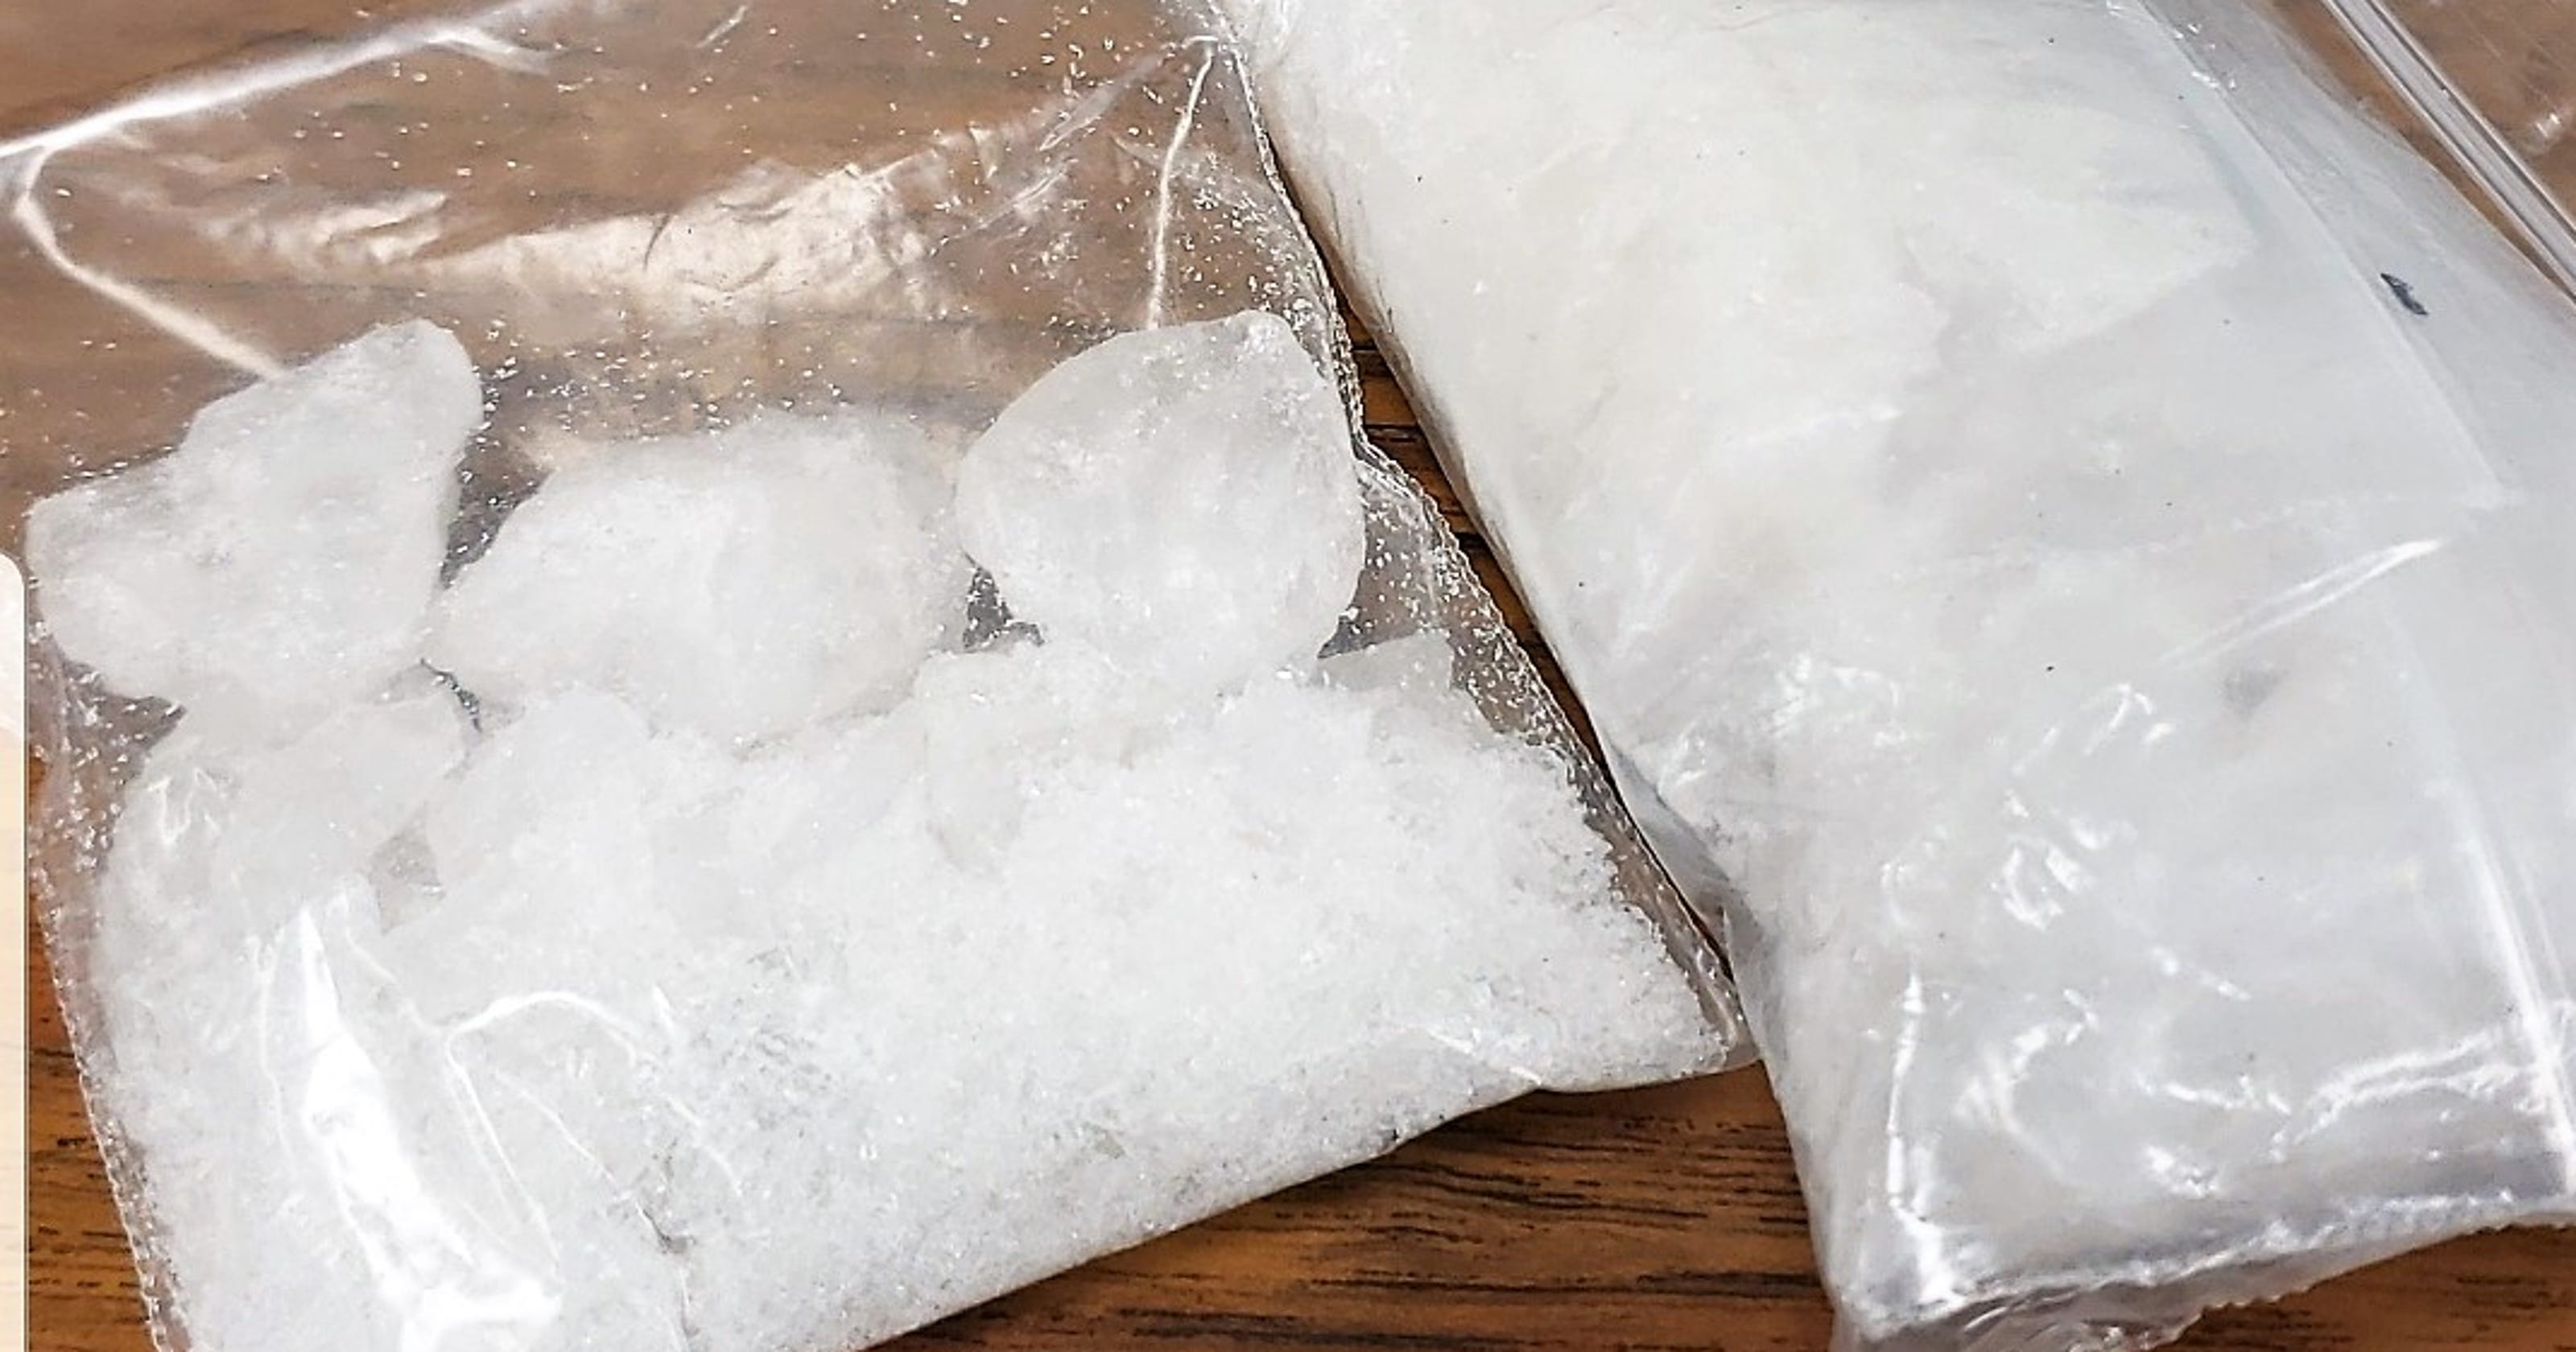 Oconto Drug Bust Police Seize Nearly 3 Ounces Of Meth In Traffic Stop